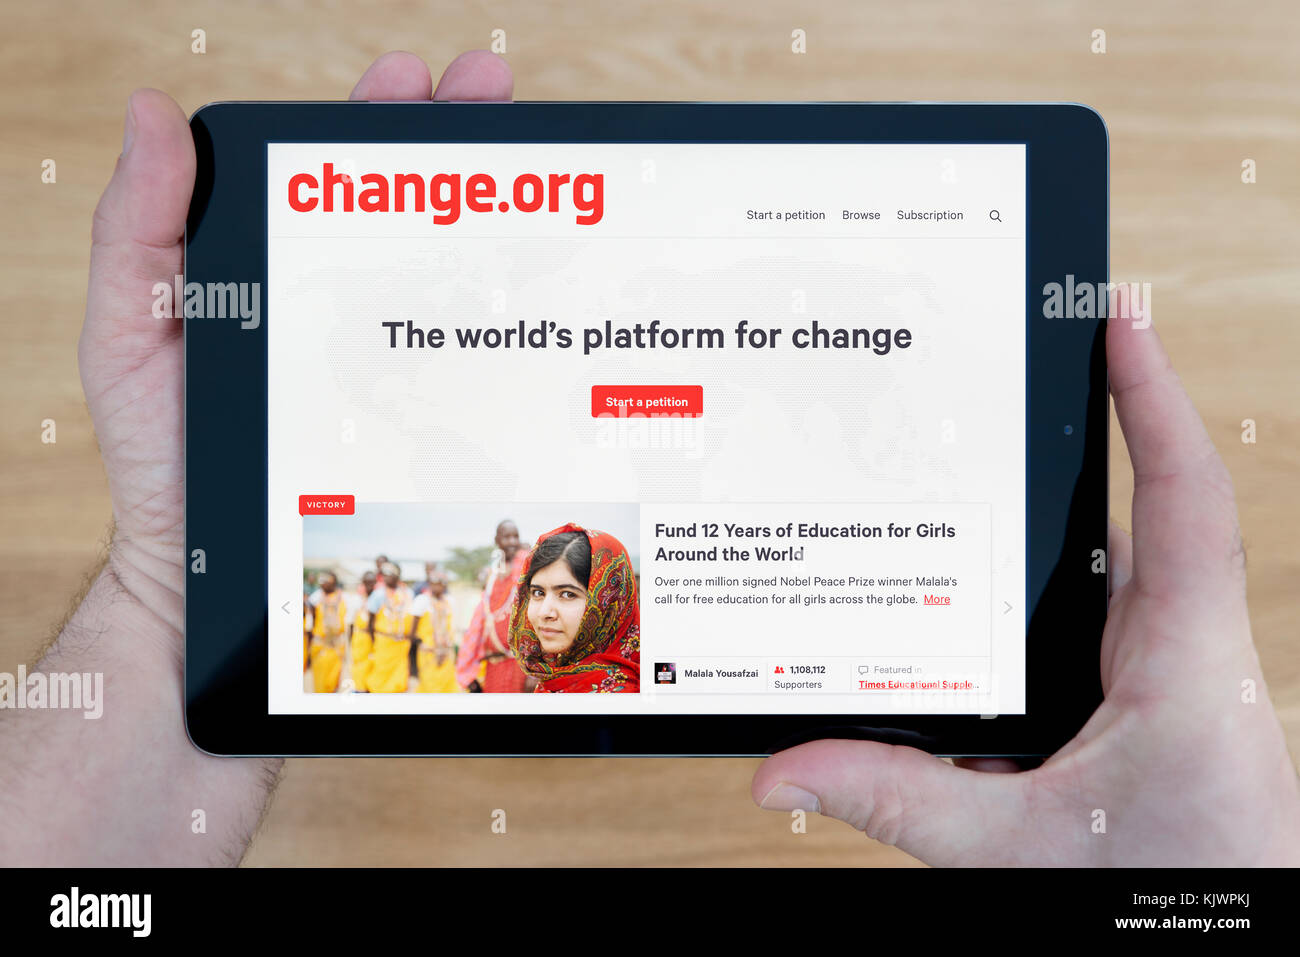 A man looks at the change.org website on his iPad tablet device, shot against a wooden table top background (Editorial use only) Stock Photo